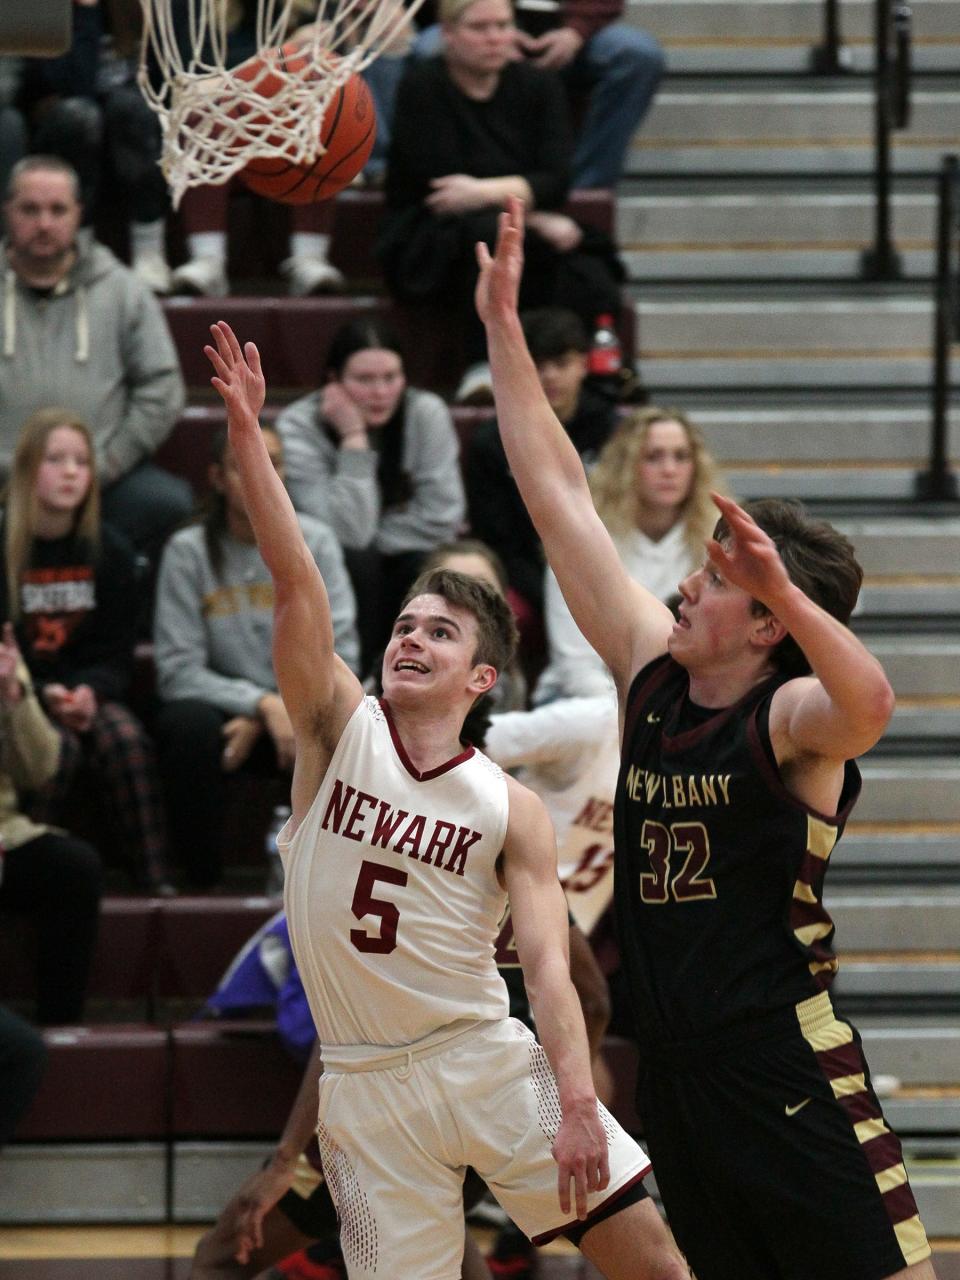 Newark senior Grant Burkholder shoots a layup under pressure from New Albany senior Will Powell during the Wildcats' 58-36 victory at Jimmy Allen Gymnasium on Friday, Feb. 24, 2023. Burkholder scored 27 points as they advanced to the district semifinals against Gahanna.